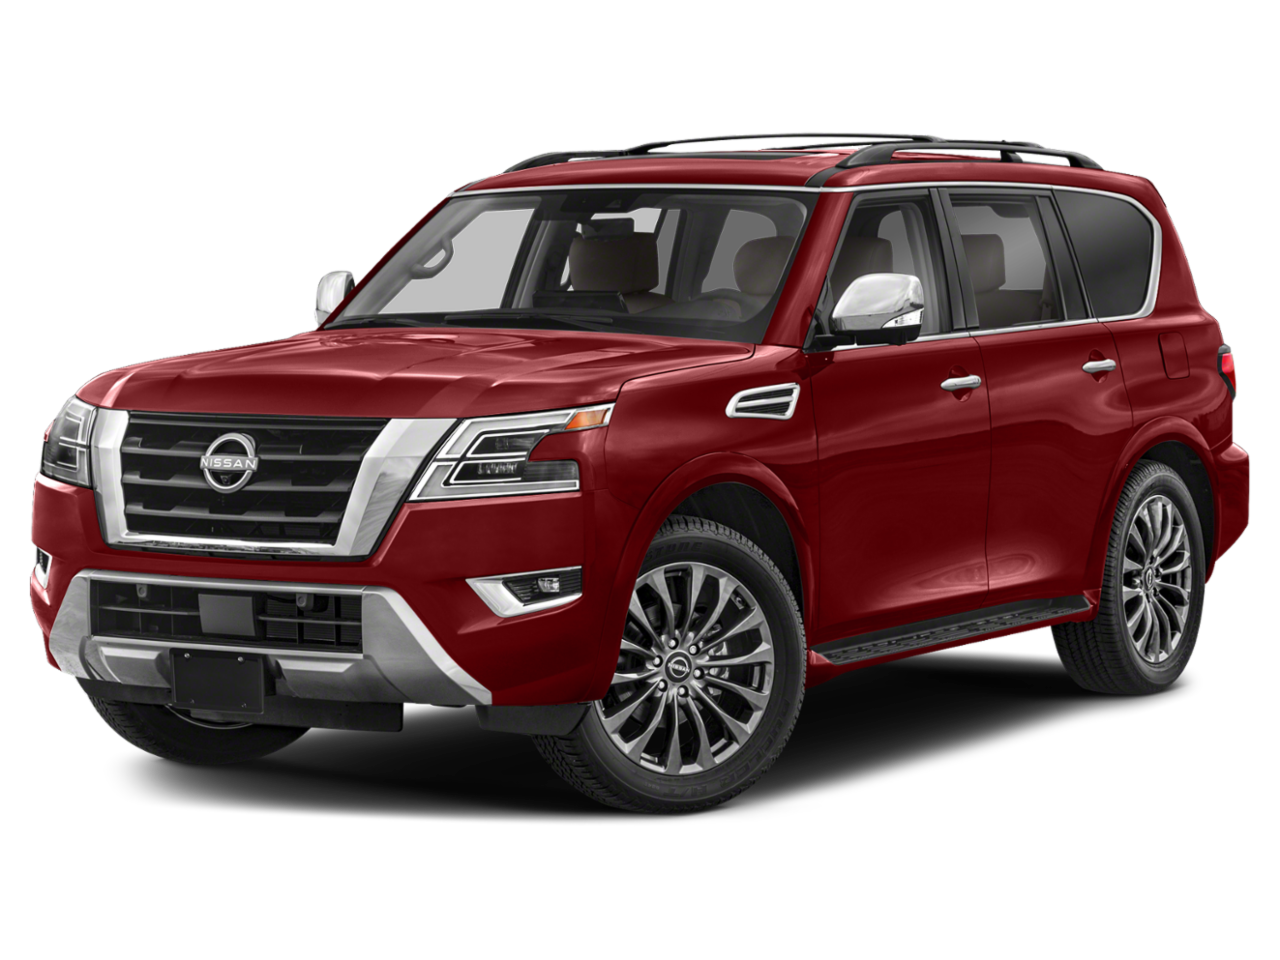 New 2023 Nissan Armada Specials and Lease Deals in Bourbonnais at Hove